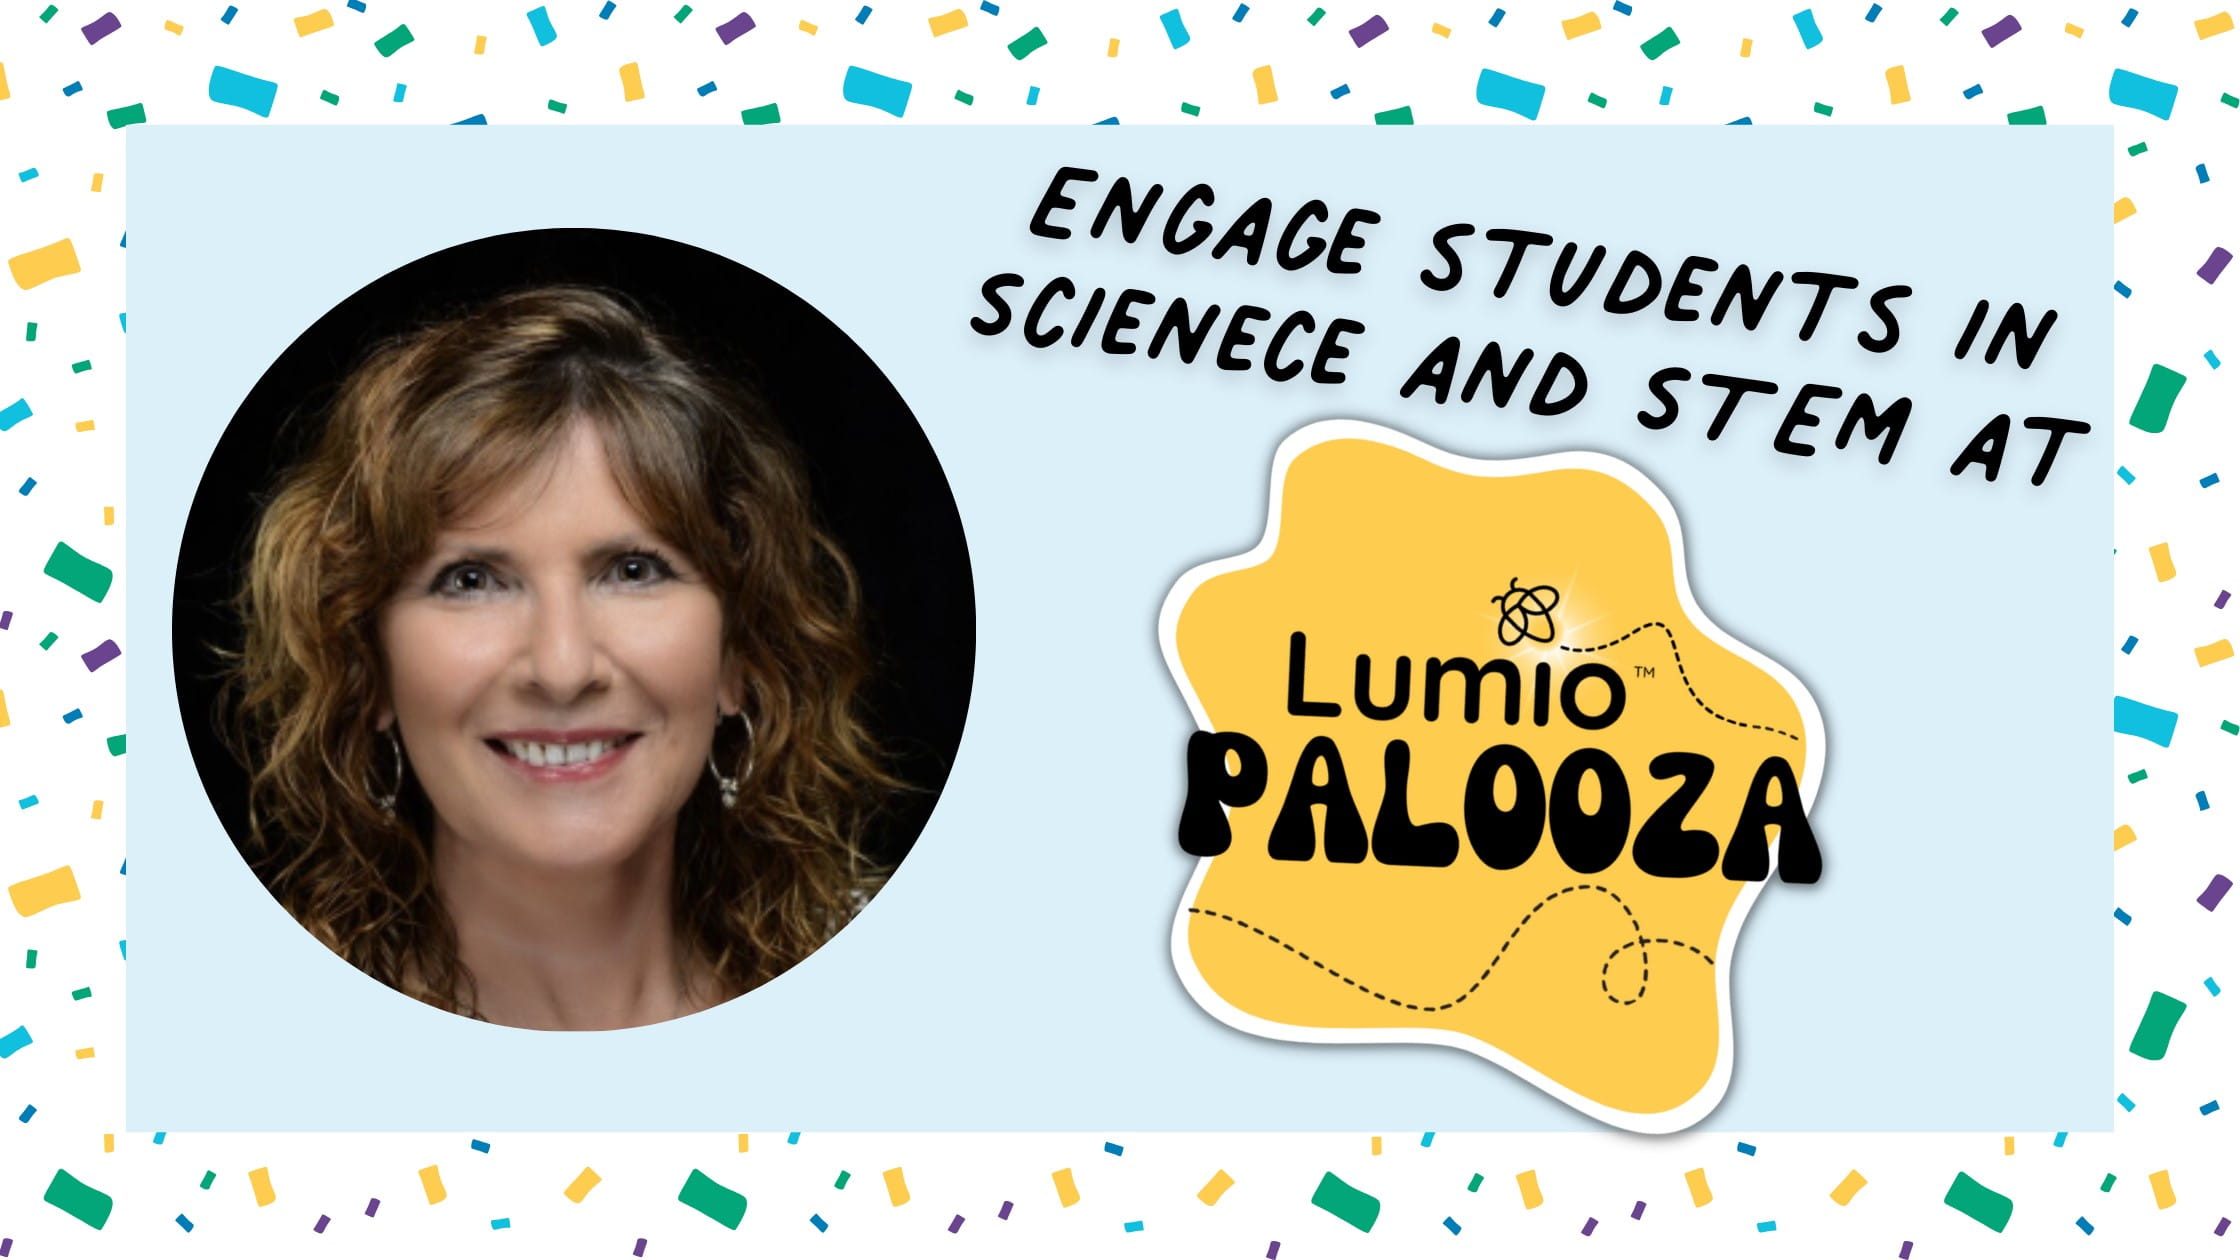 A photo of Lumio Ambassador Dr. Monica Alicea with the title “Engage your students in Science and Stem at Lumio Palooza”